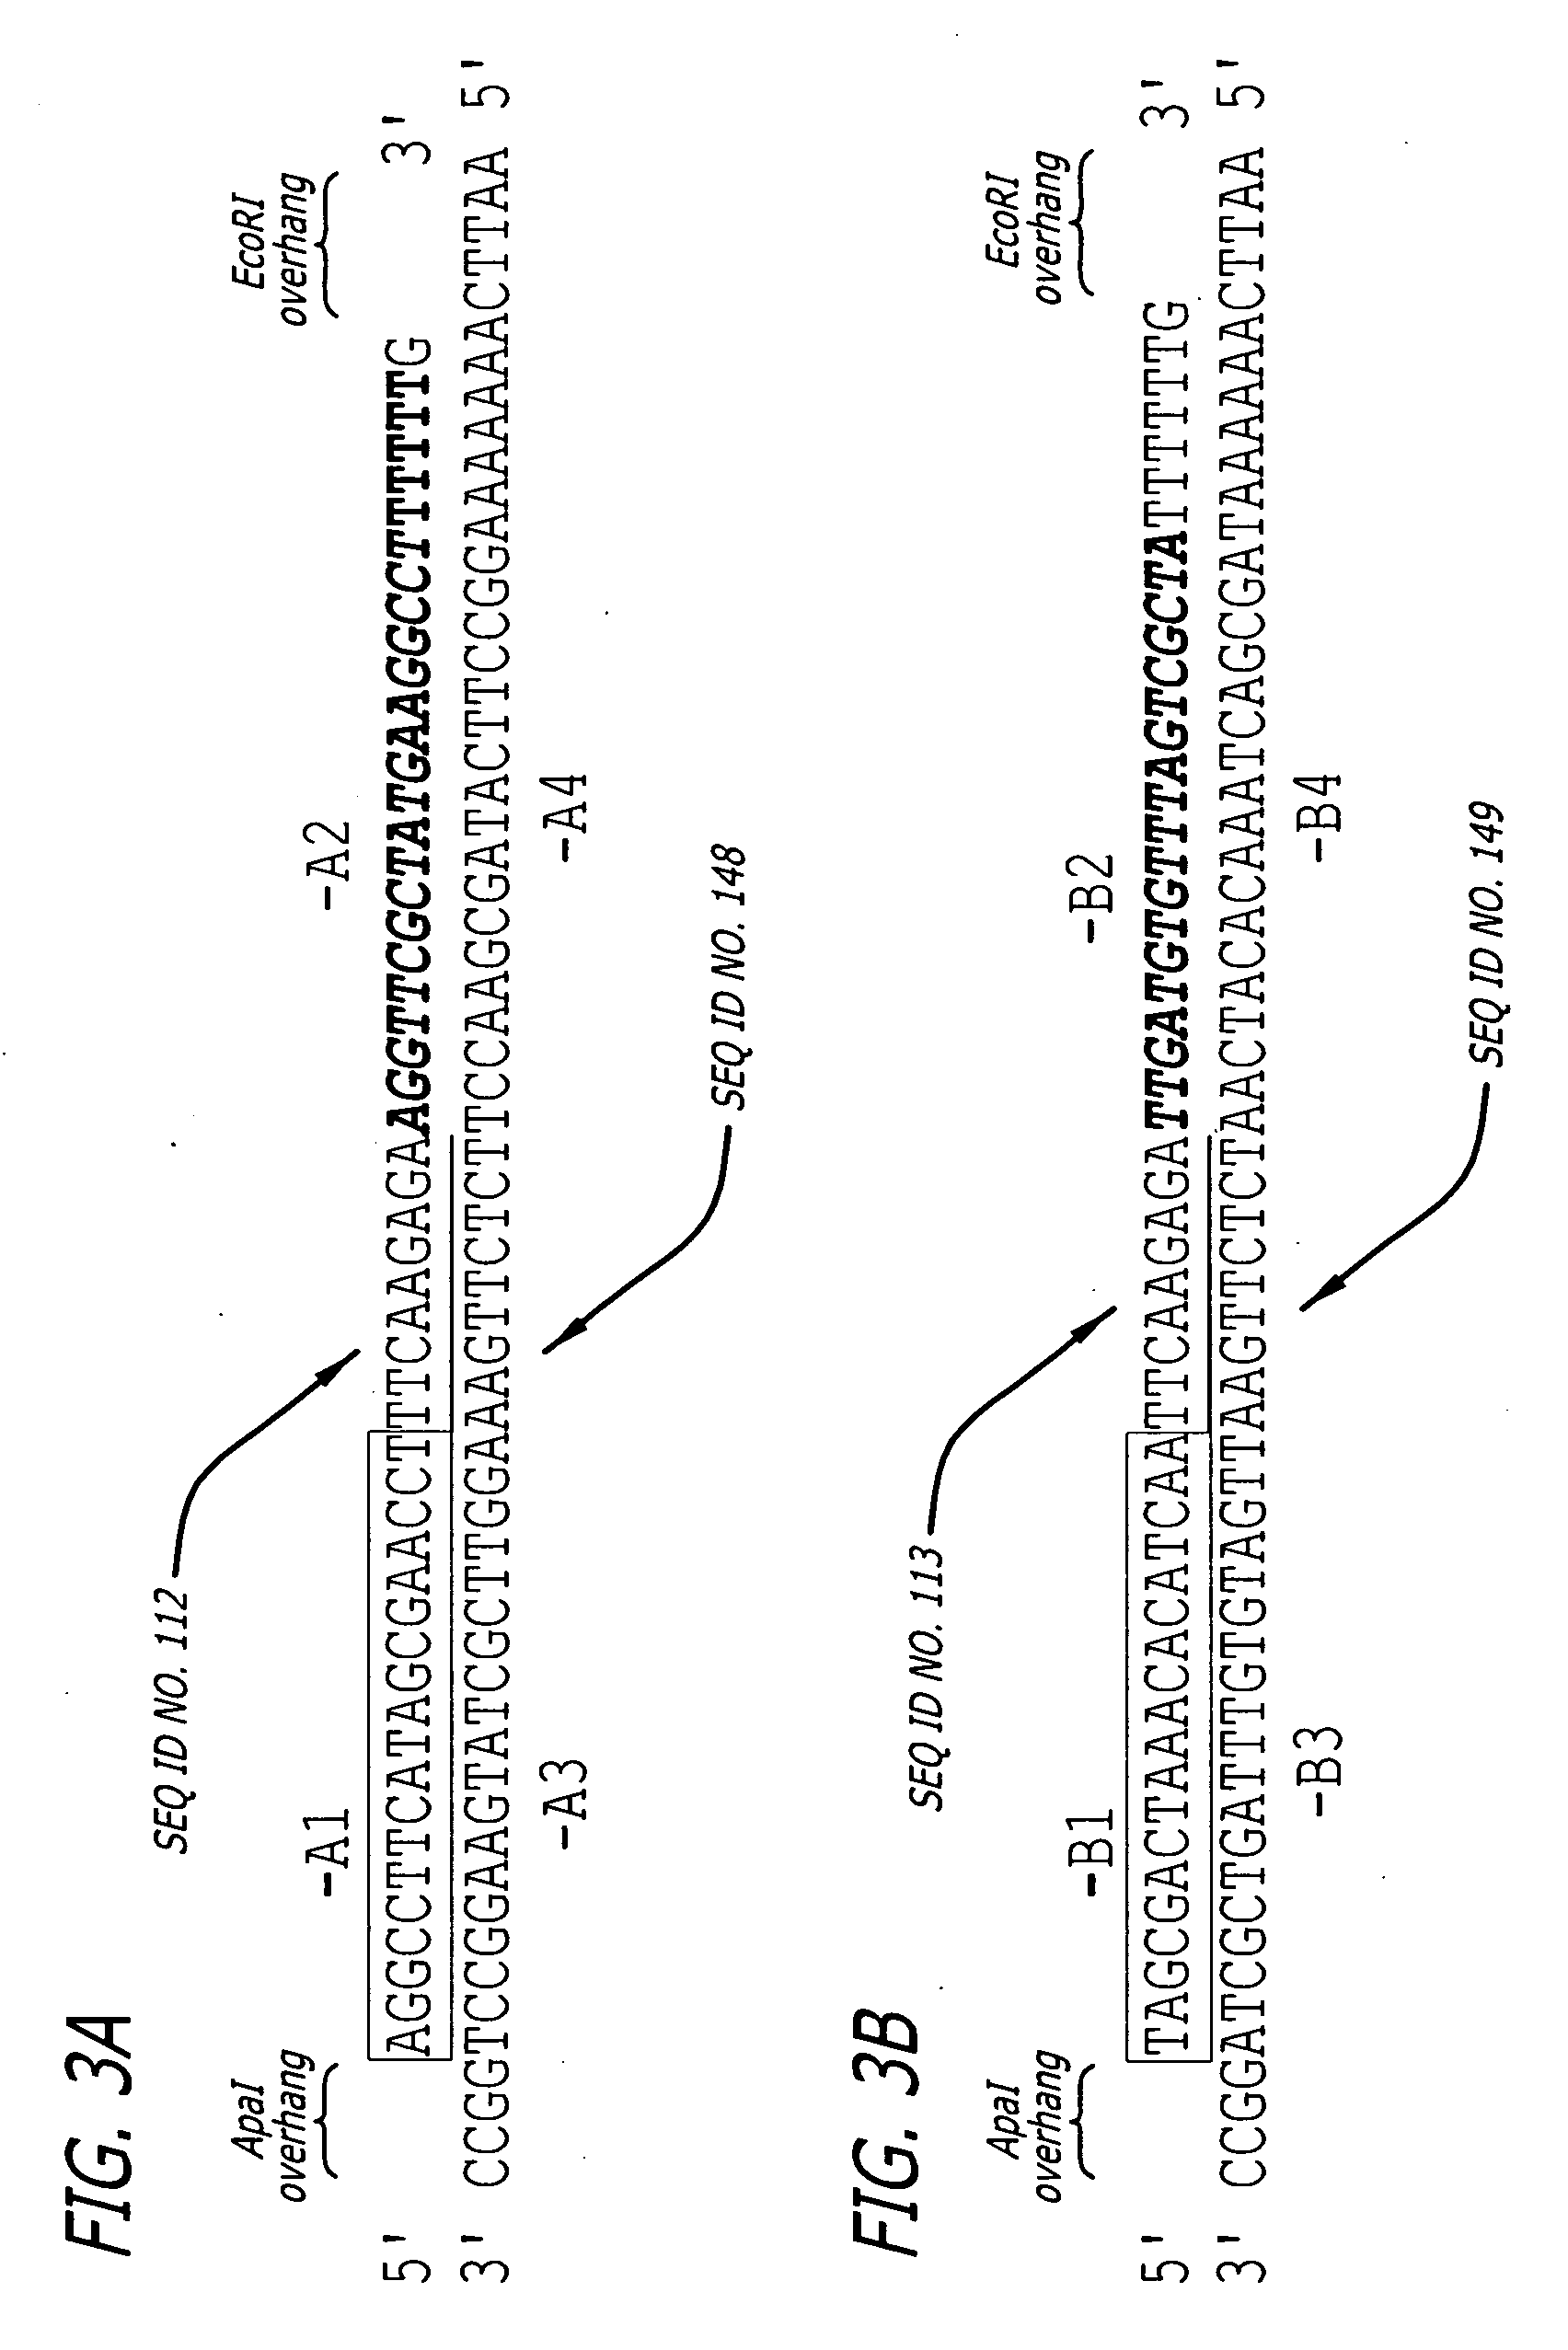 Methods and sequences to preferentially suppress expression of mutated huntingtin